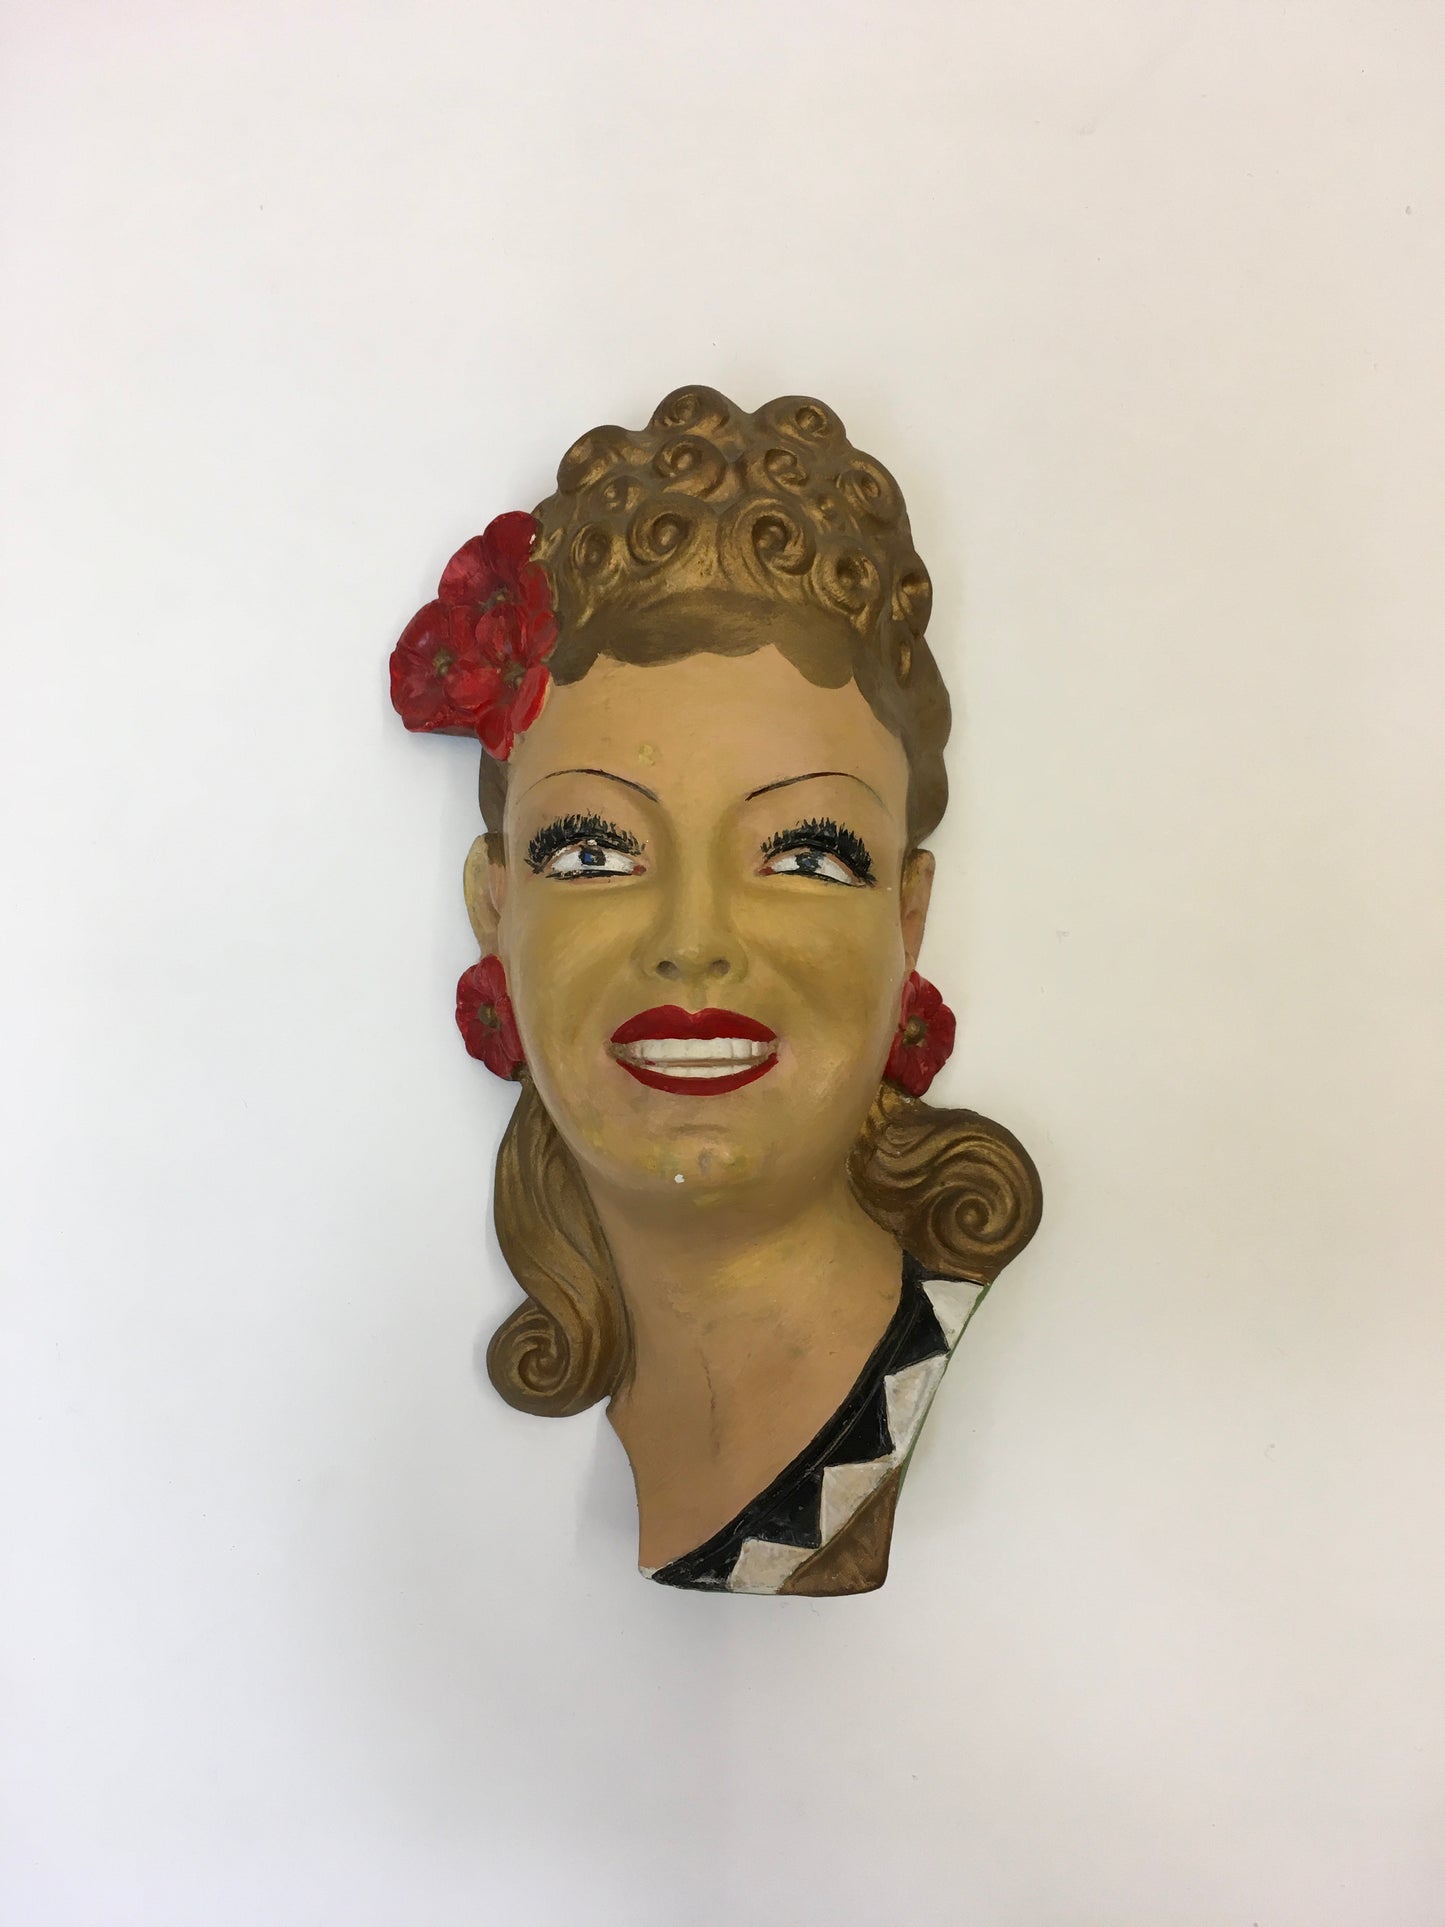 Original 1950’s Ladies Head Wall Mask - Great For A Vintage Interior